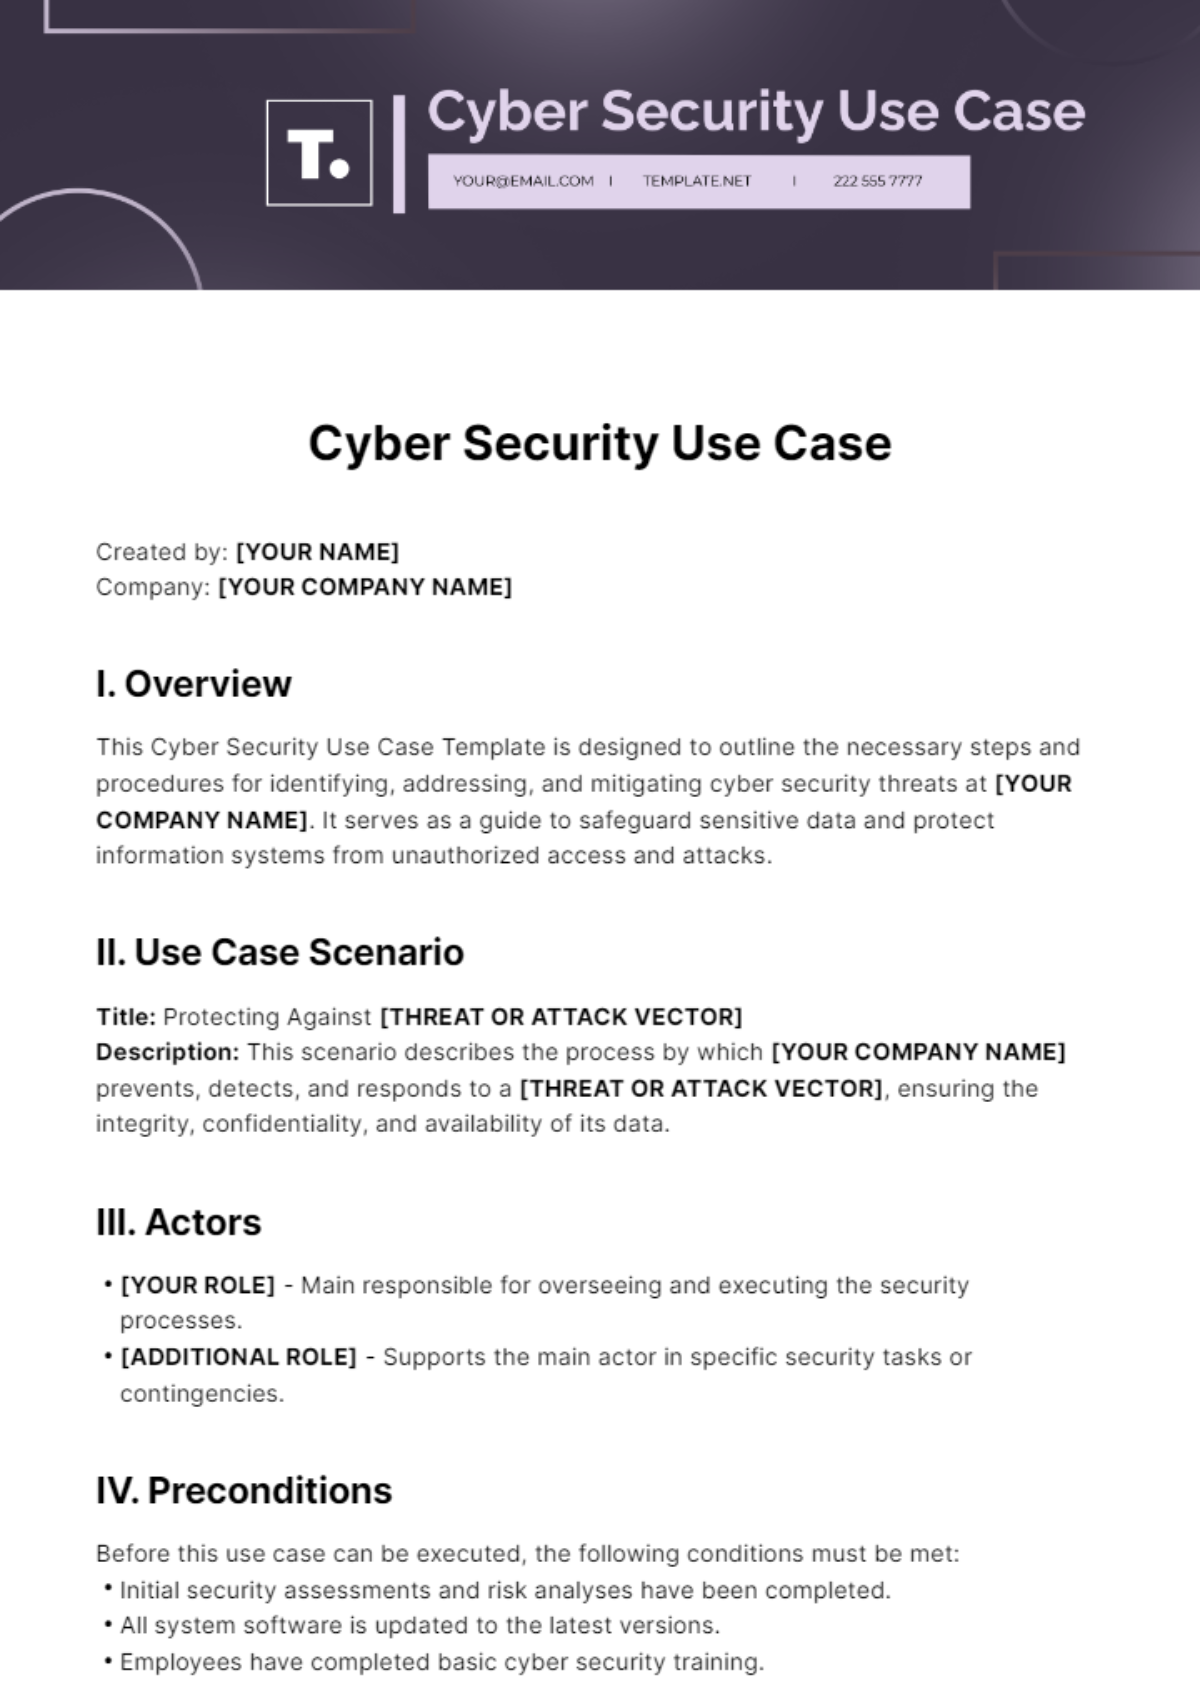 Cyber Security Use Case Template